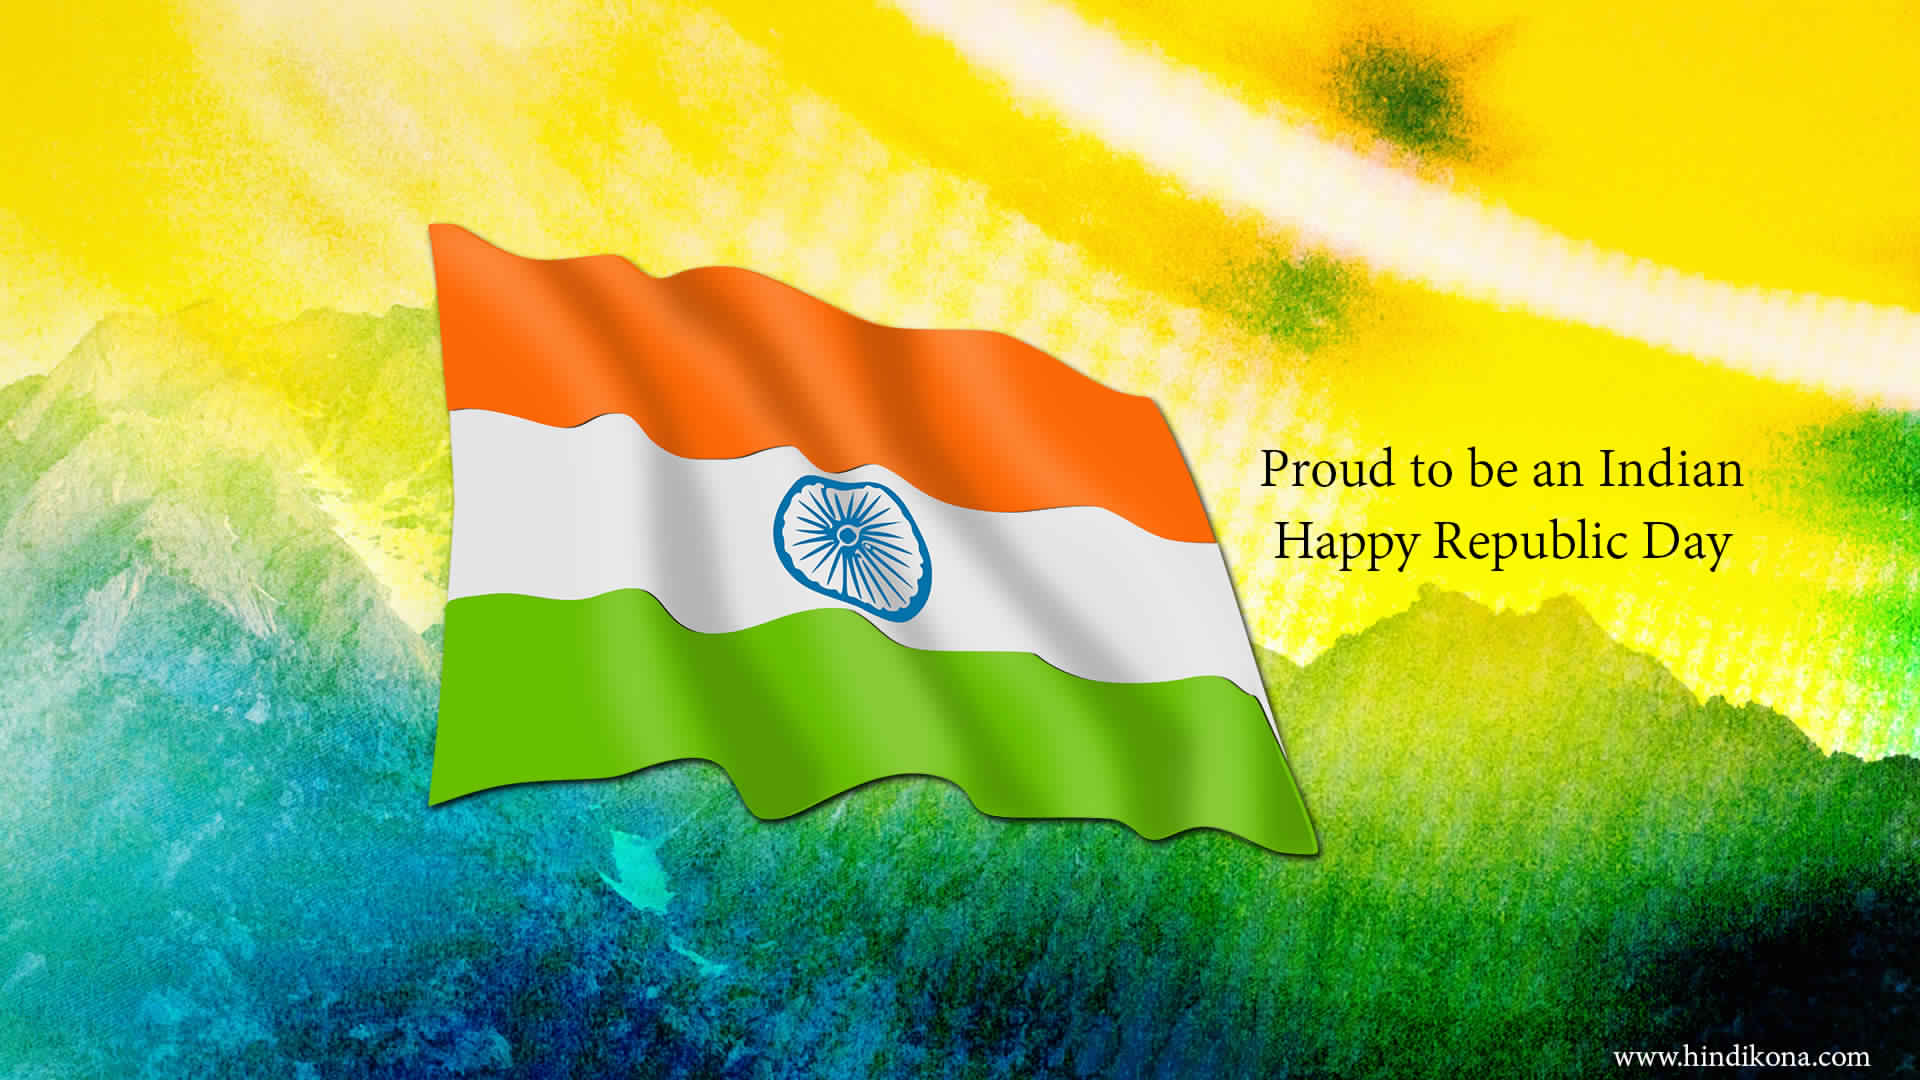 Free Download India Republic Day Independence Day Wallpaper